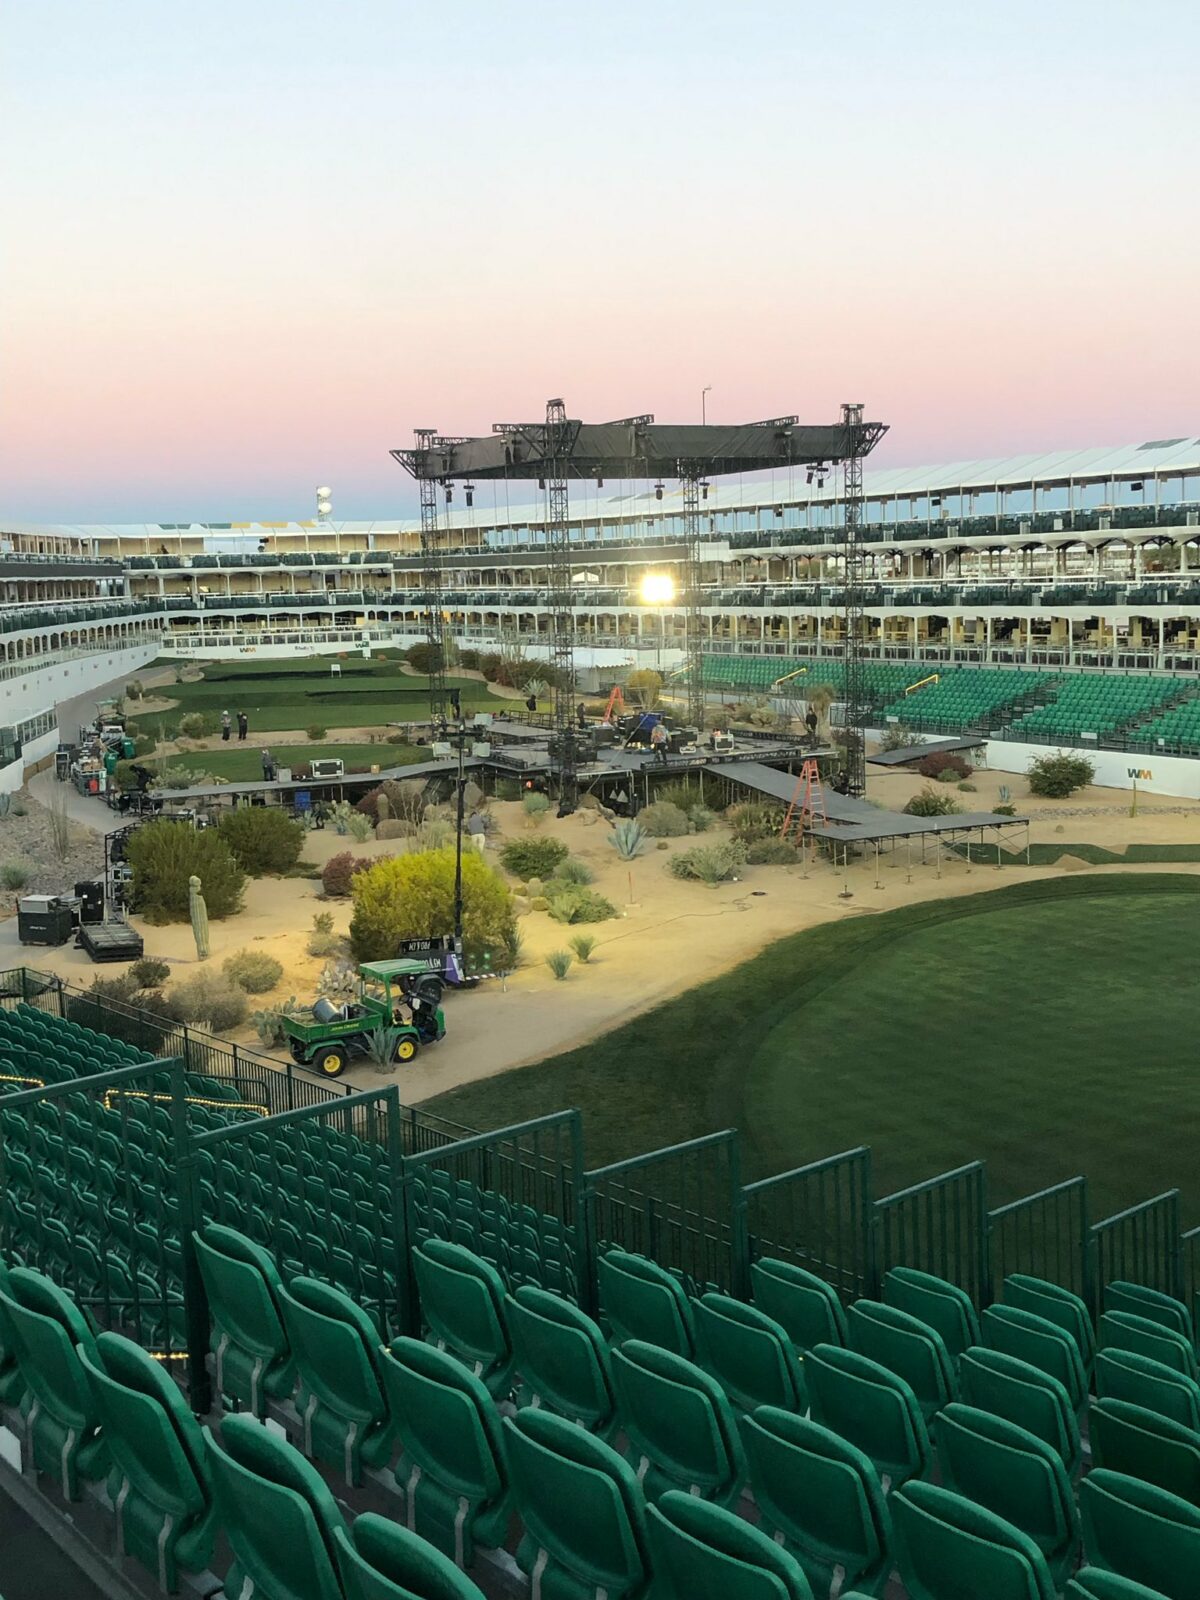 Stage is set—literally—for first Concert in Coliseum on 16th hole at TPC Scottsdale